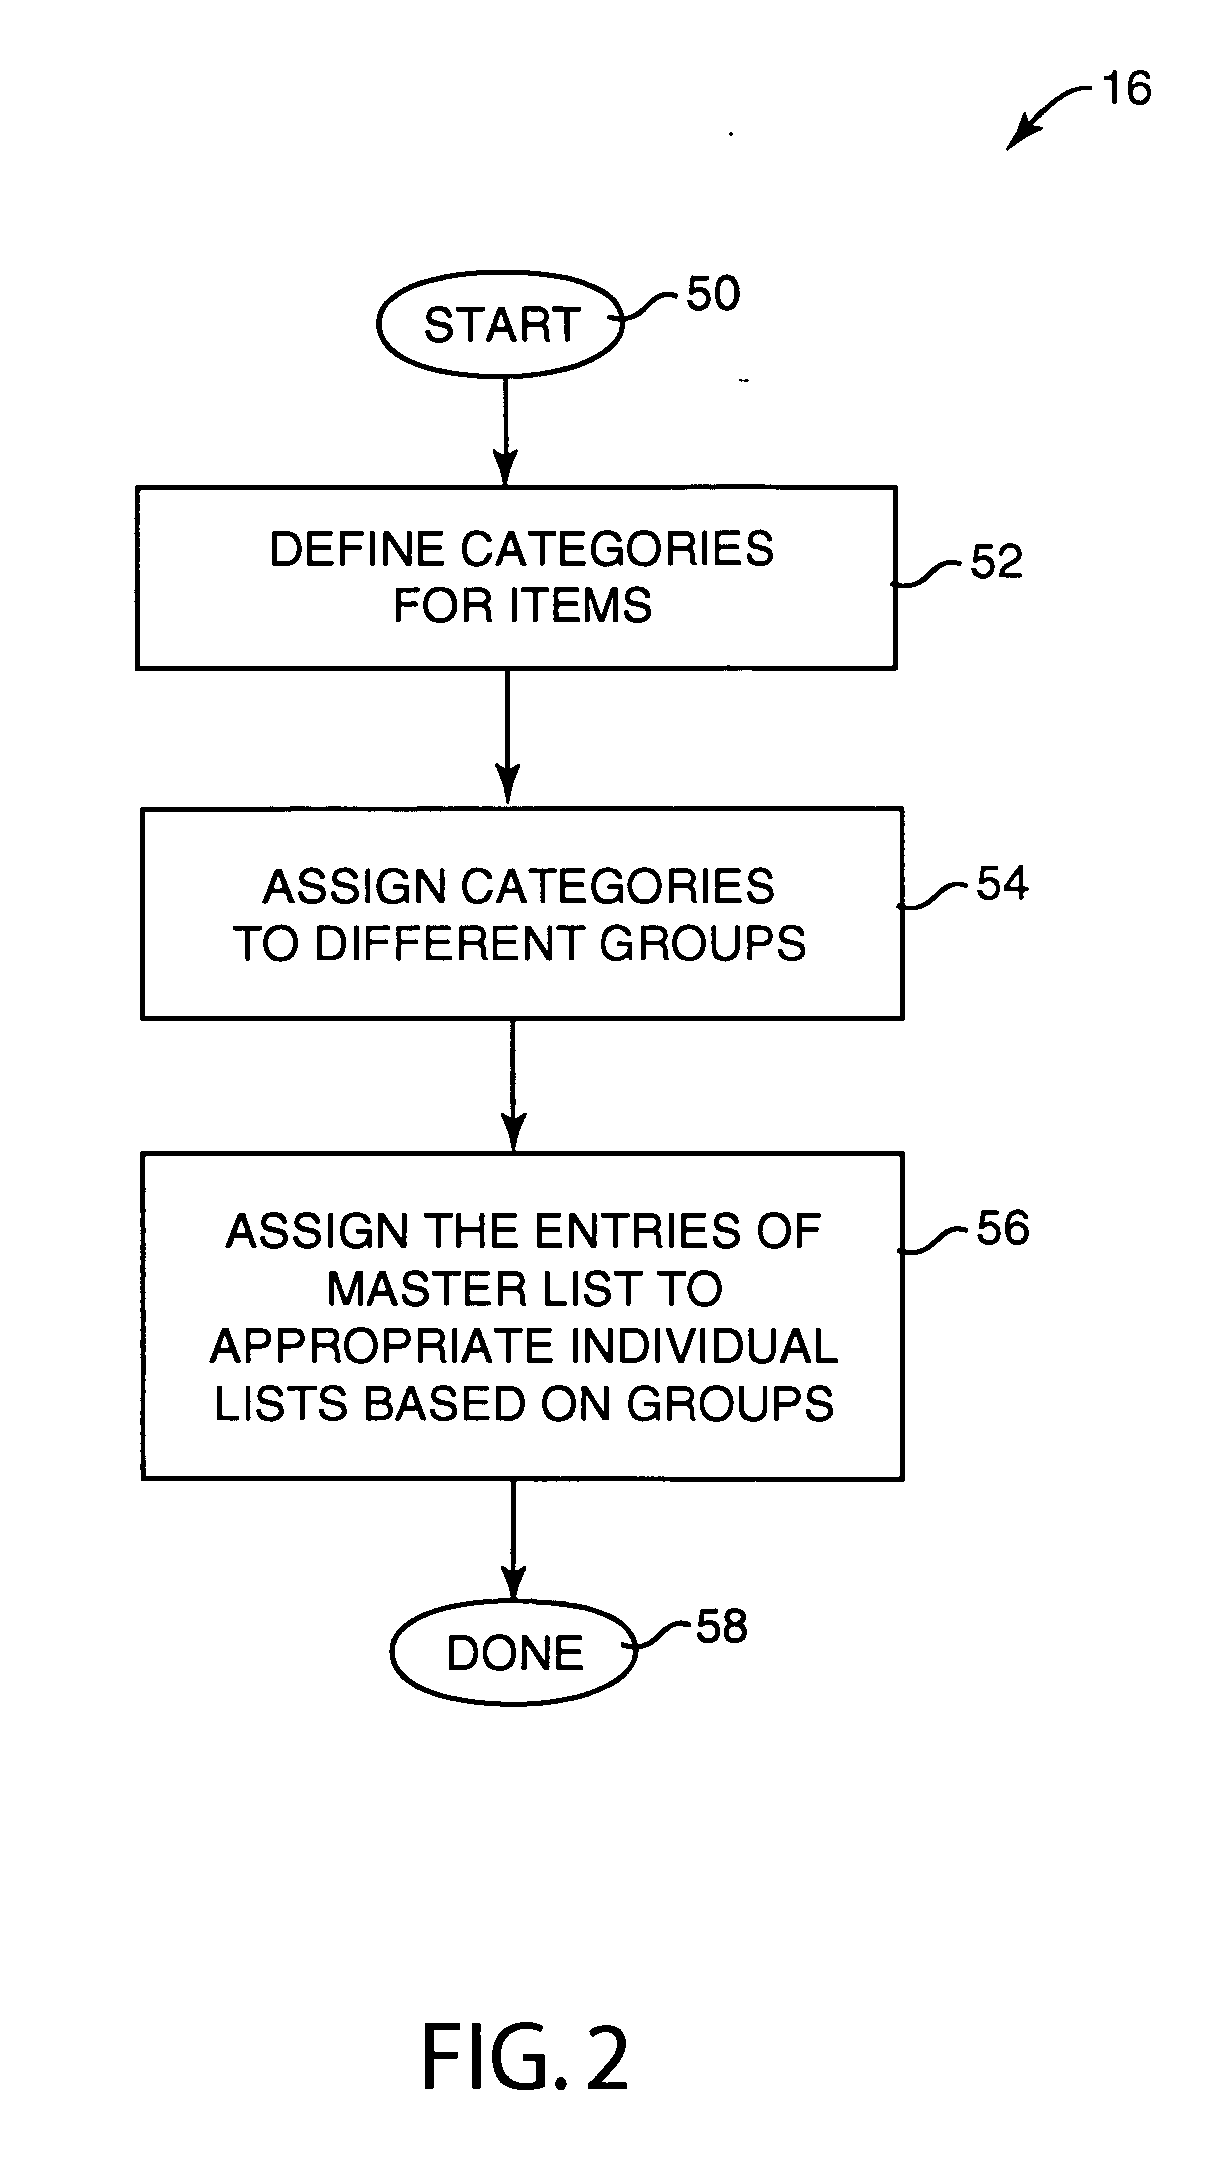 Method and system for supporting coordination and collaboration of multiple shoppers